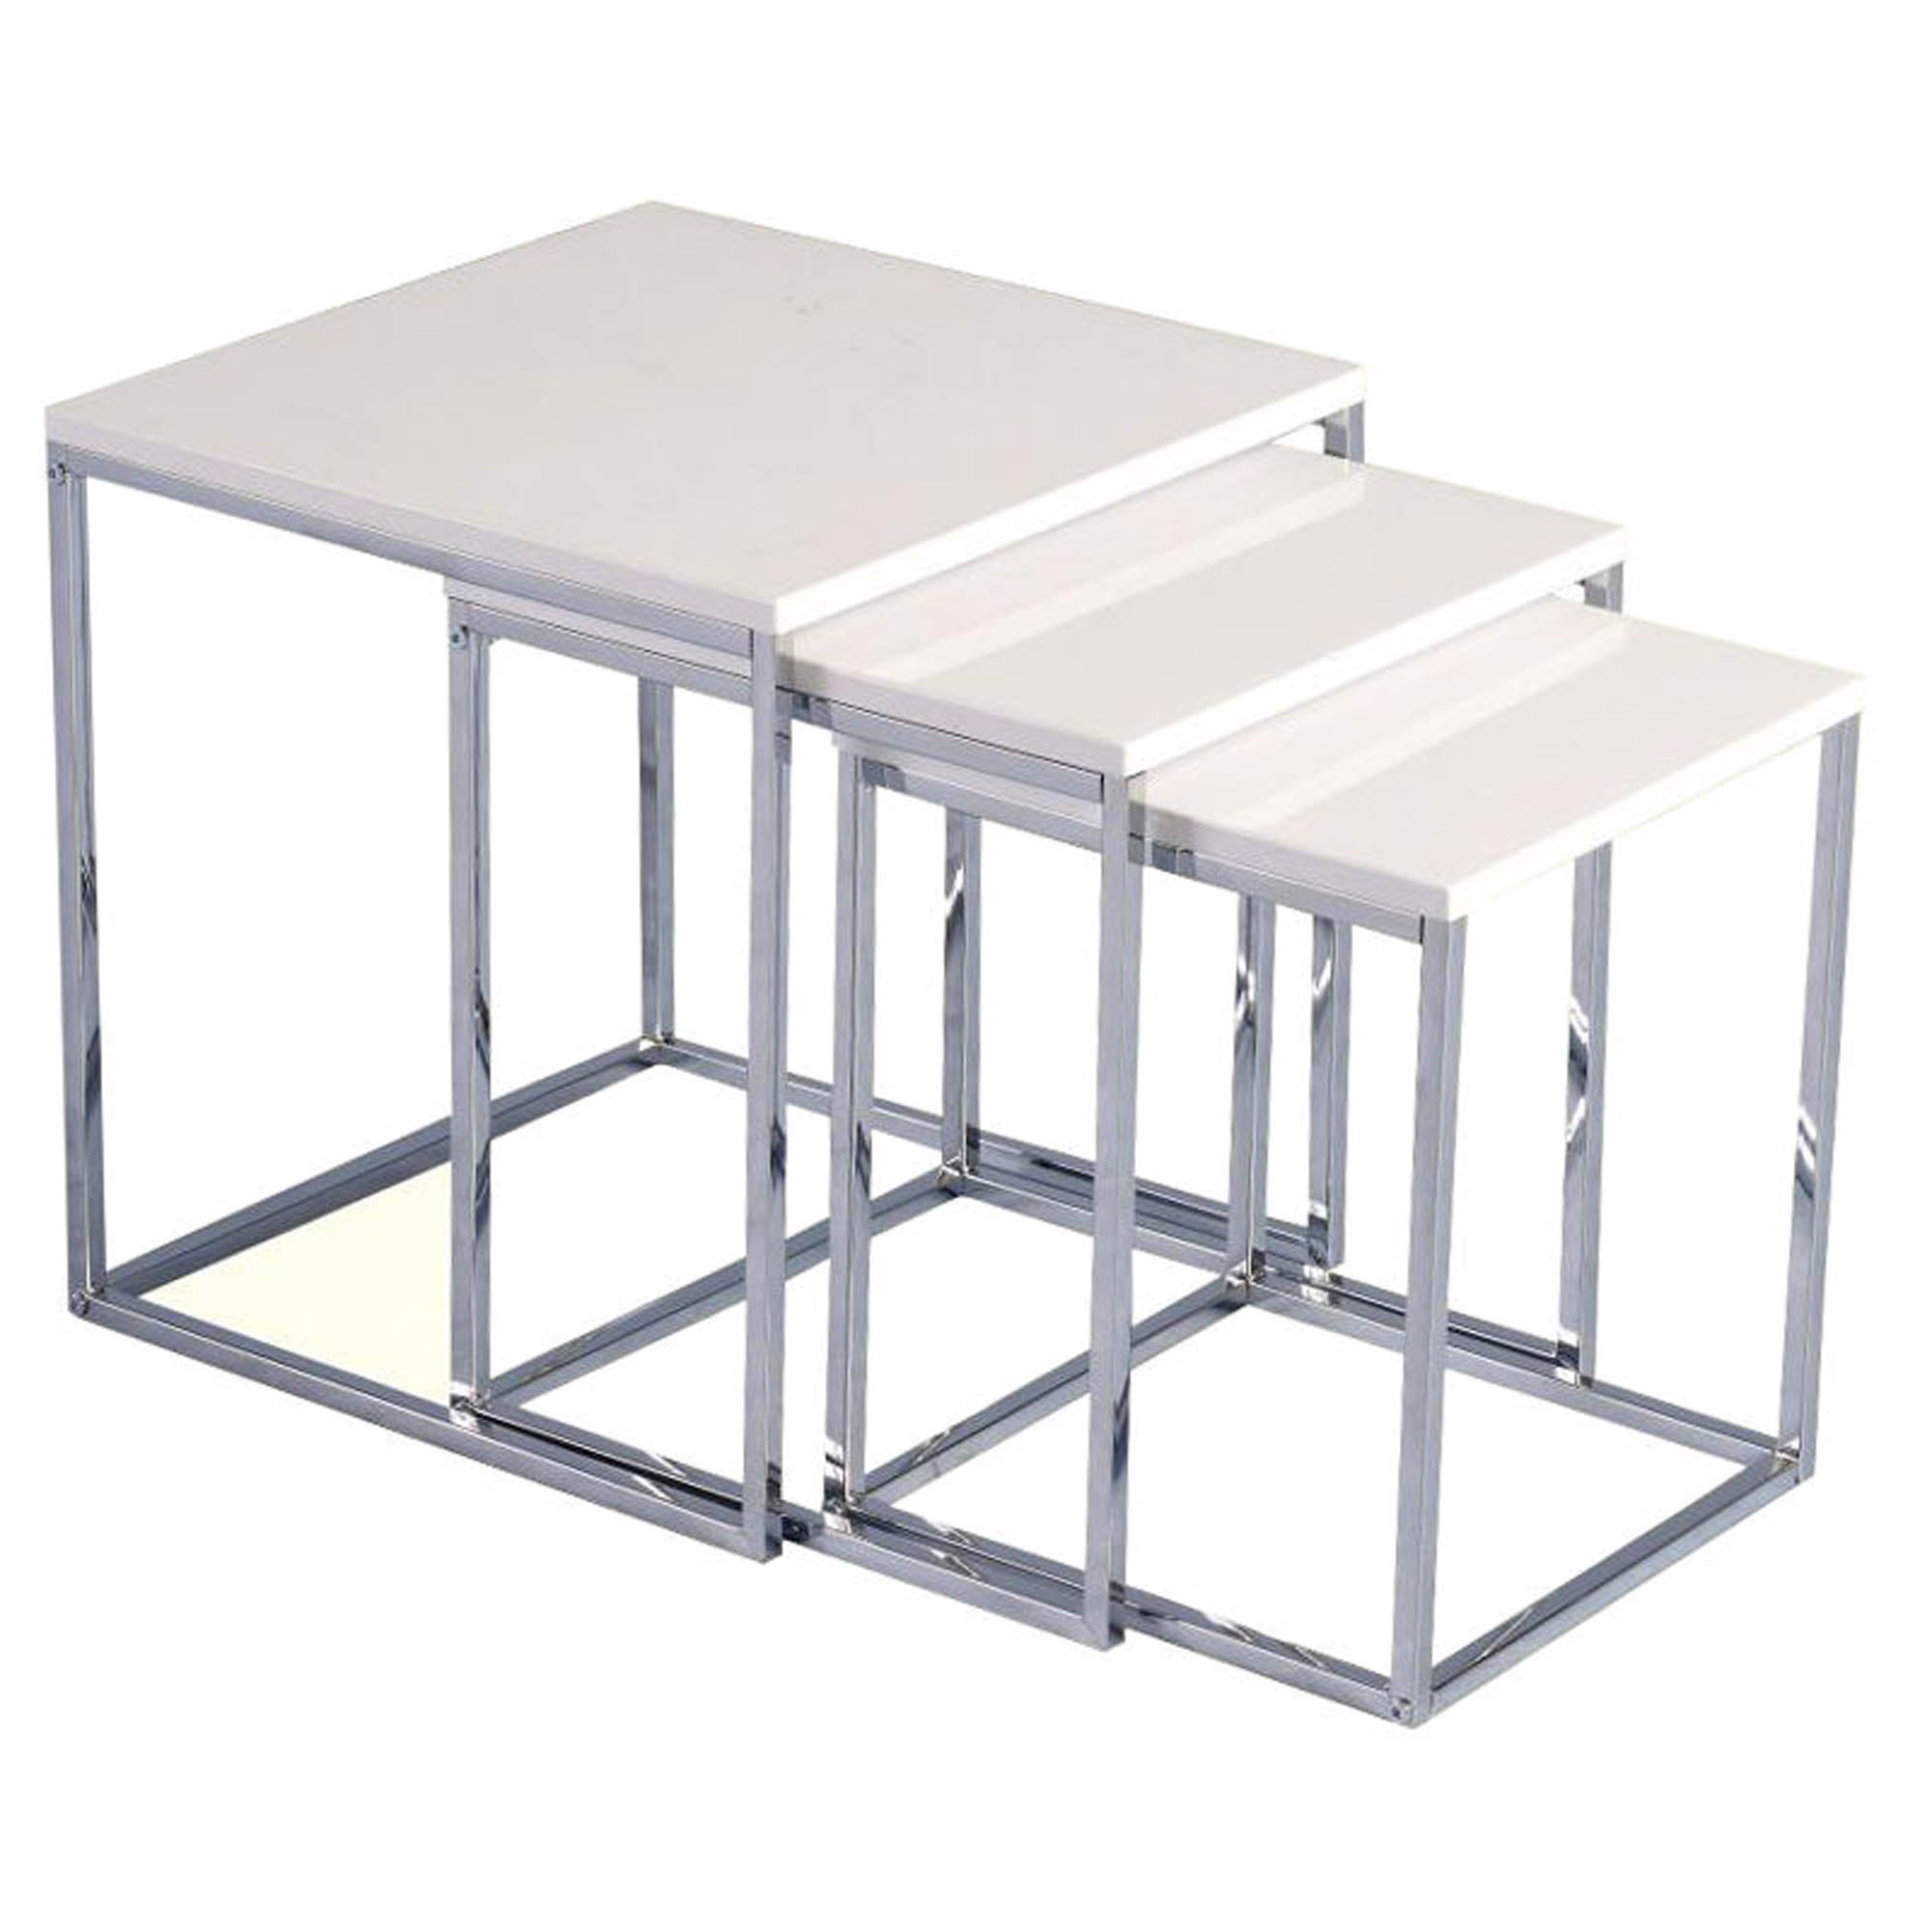 Charisma Nest of Tables, White Gloss